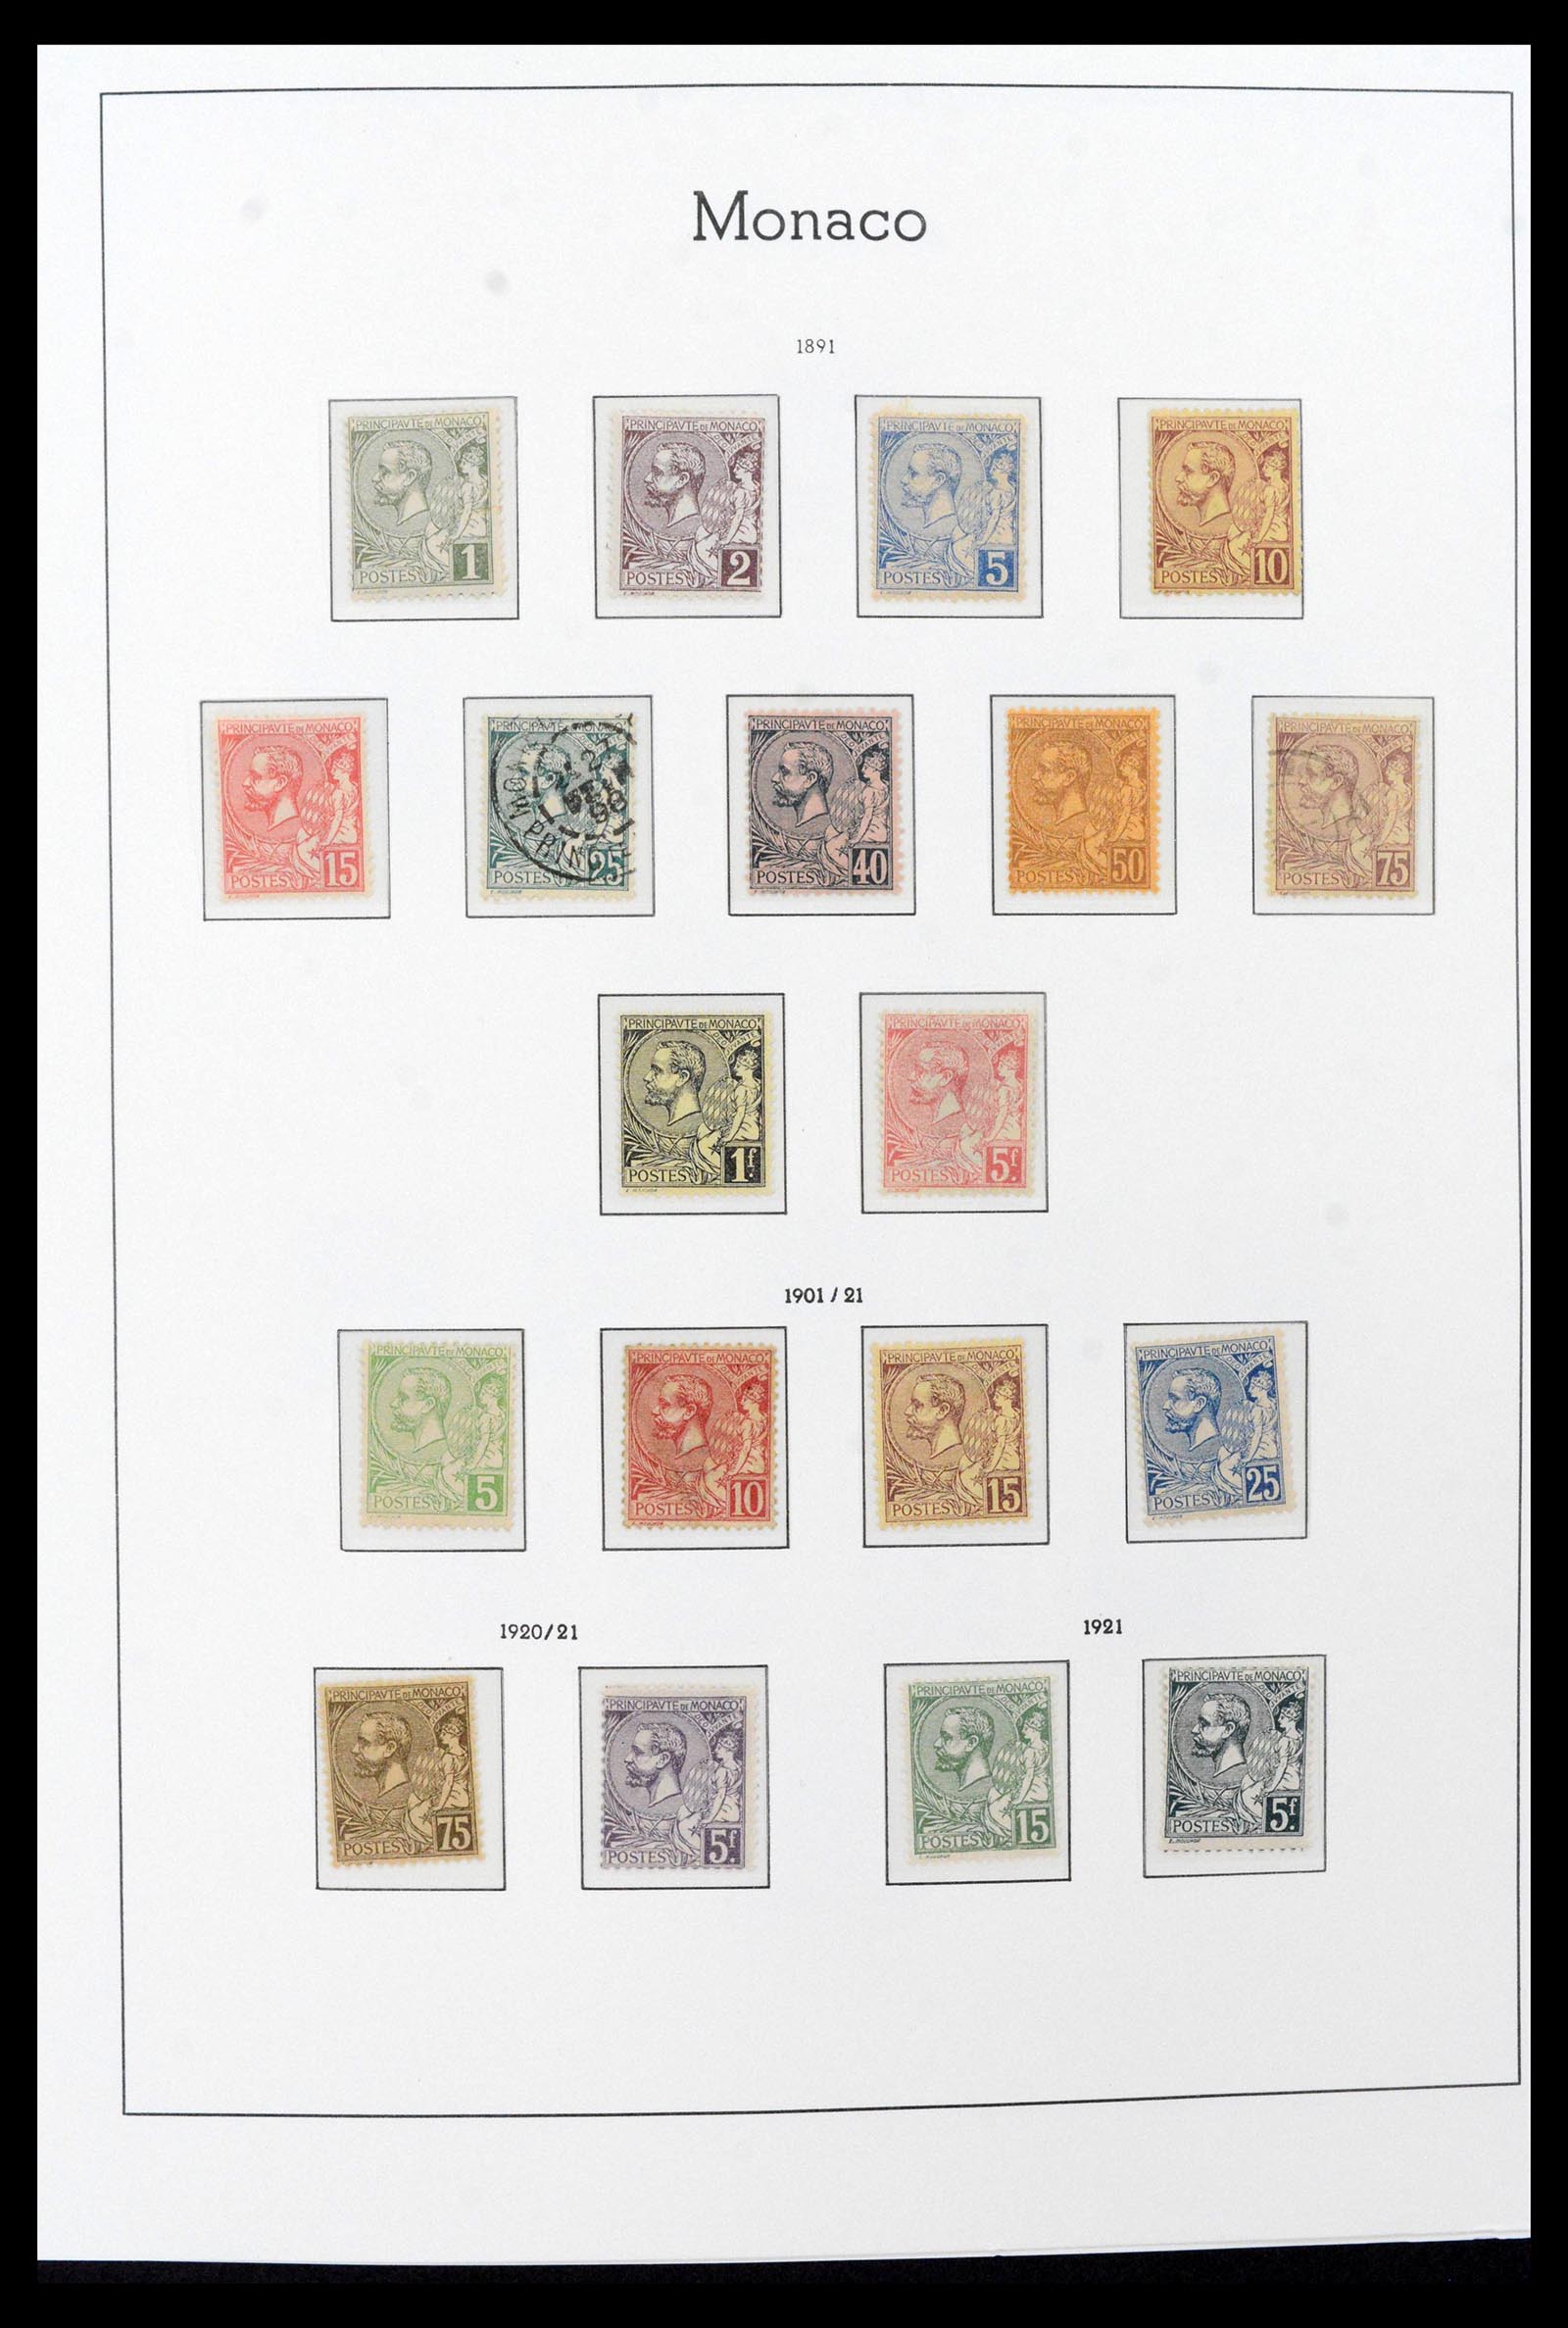 39390 0002 - Stamp collection 39390 Monaco complete 1885-1990.